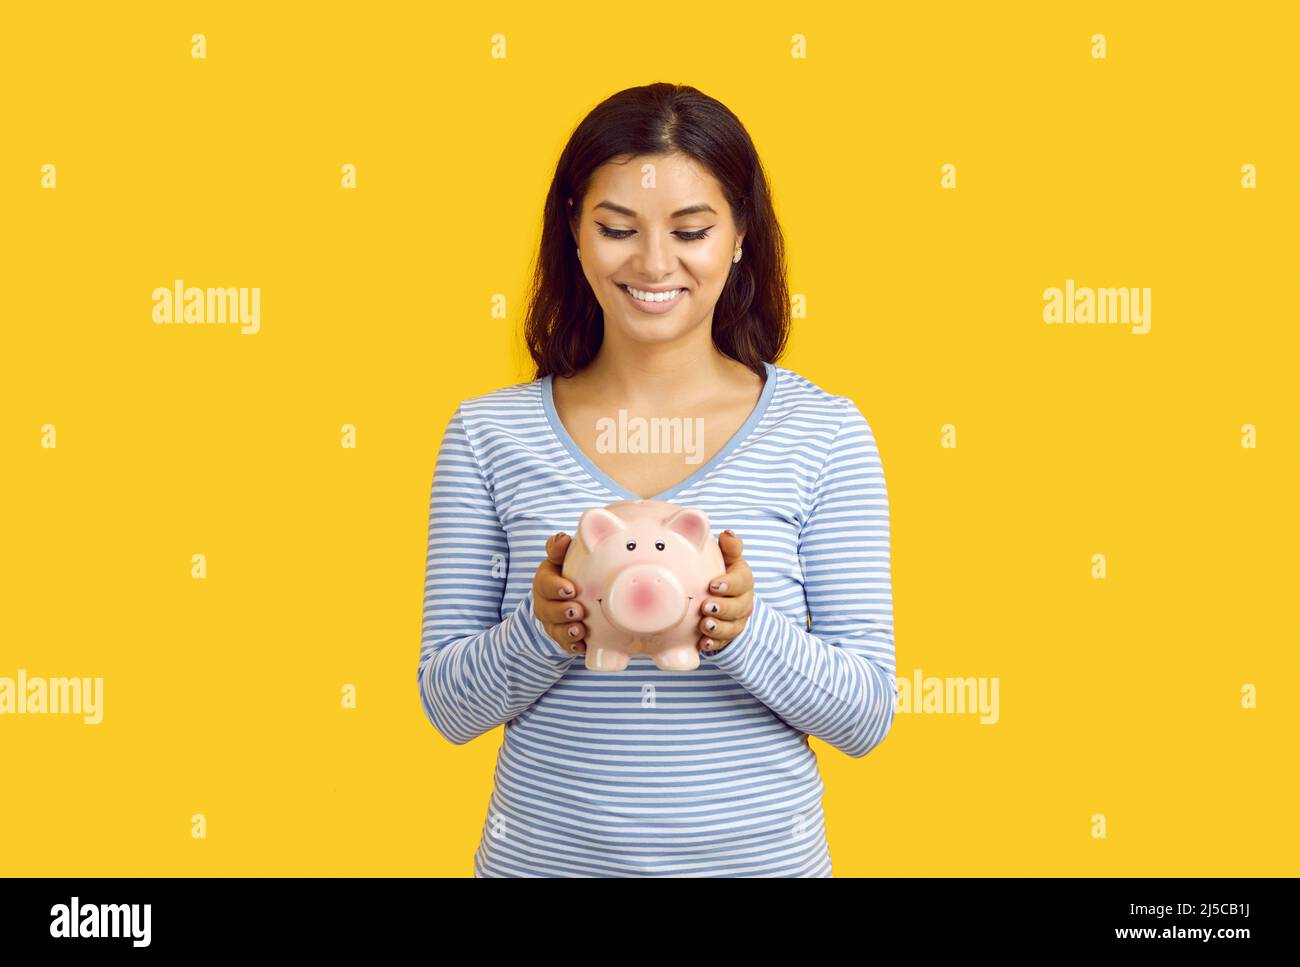 Joyful young casual woman holding piggy bank in form of pig isolated on yellow background. Stock Photo